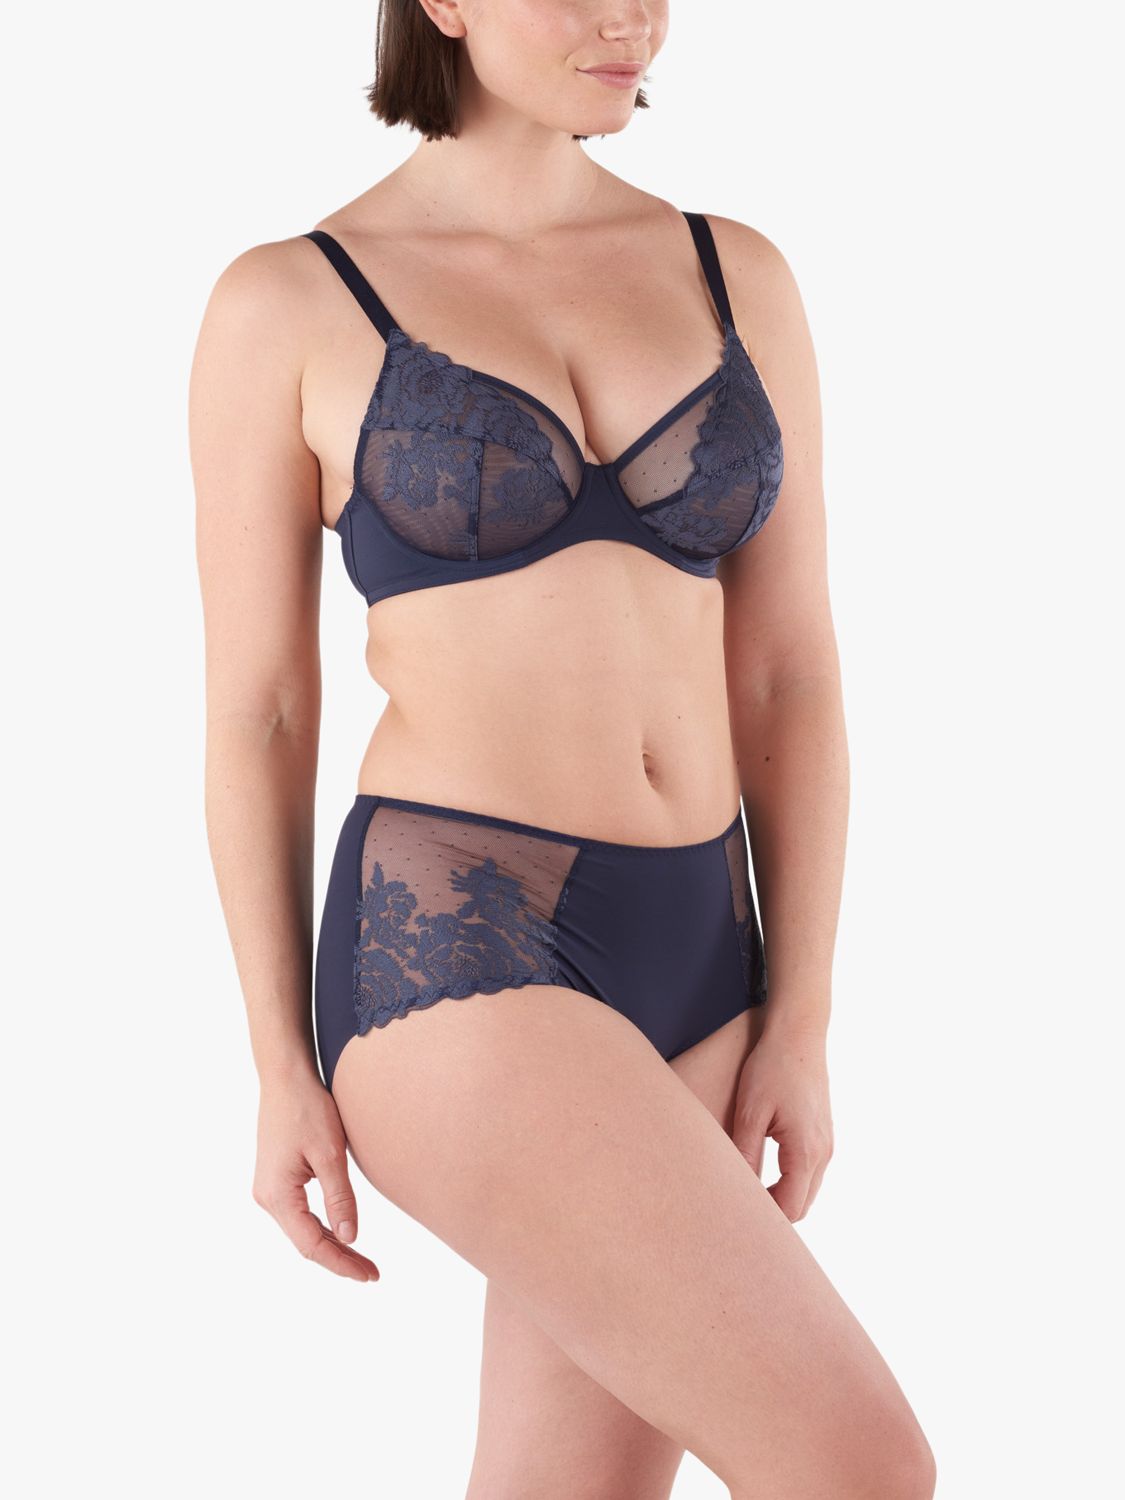 Buy Maison Lejaby Floral Lace Underwired Full Cup Bra Online at johnlewis.com